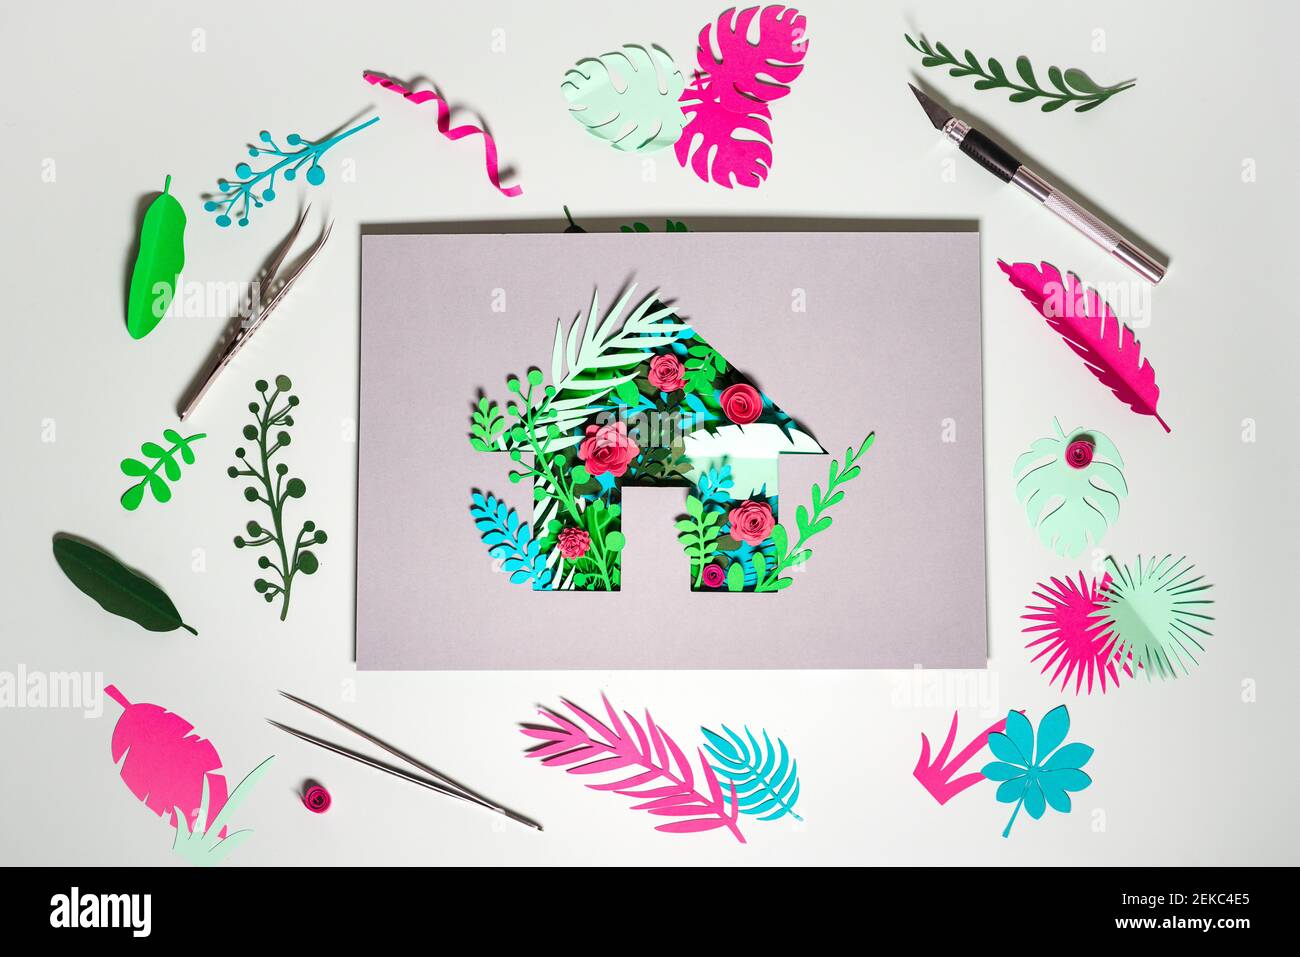 Paper craft of Eco home with plants and flowers amidst scraps on white background Stock Photo